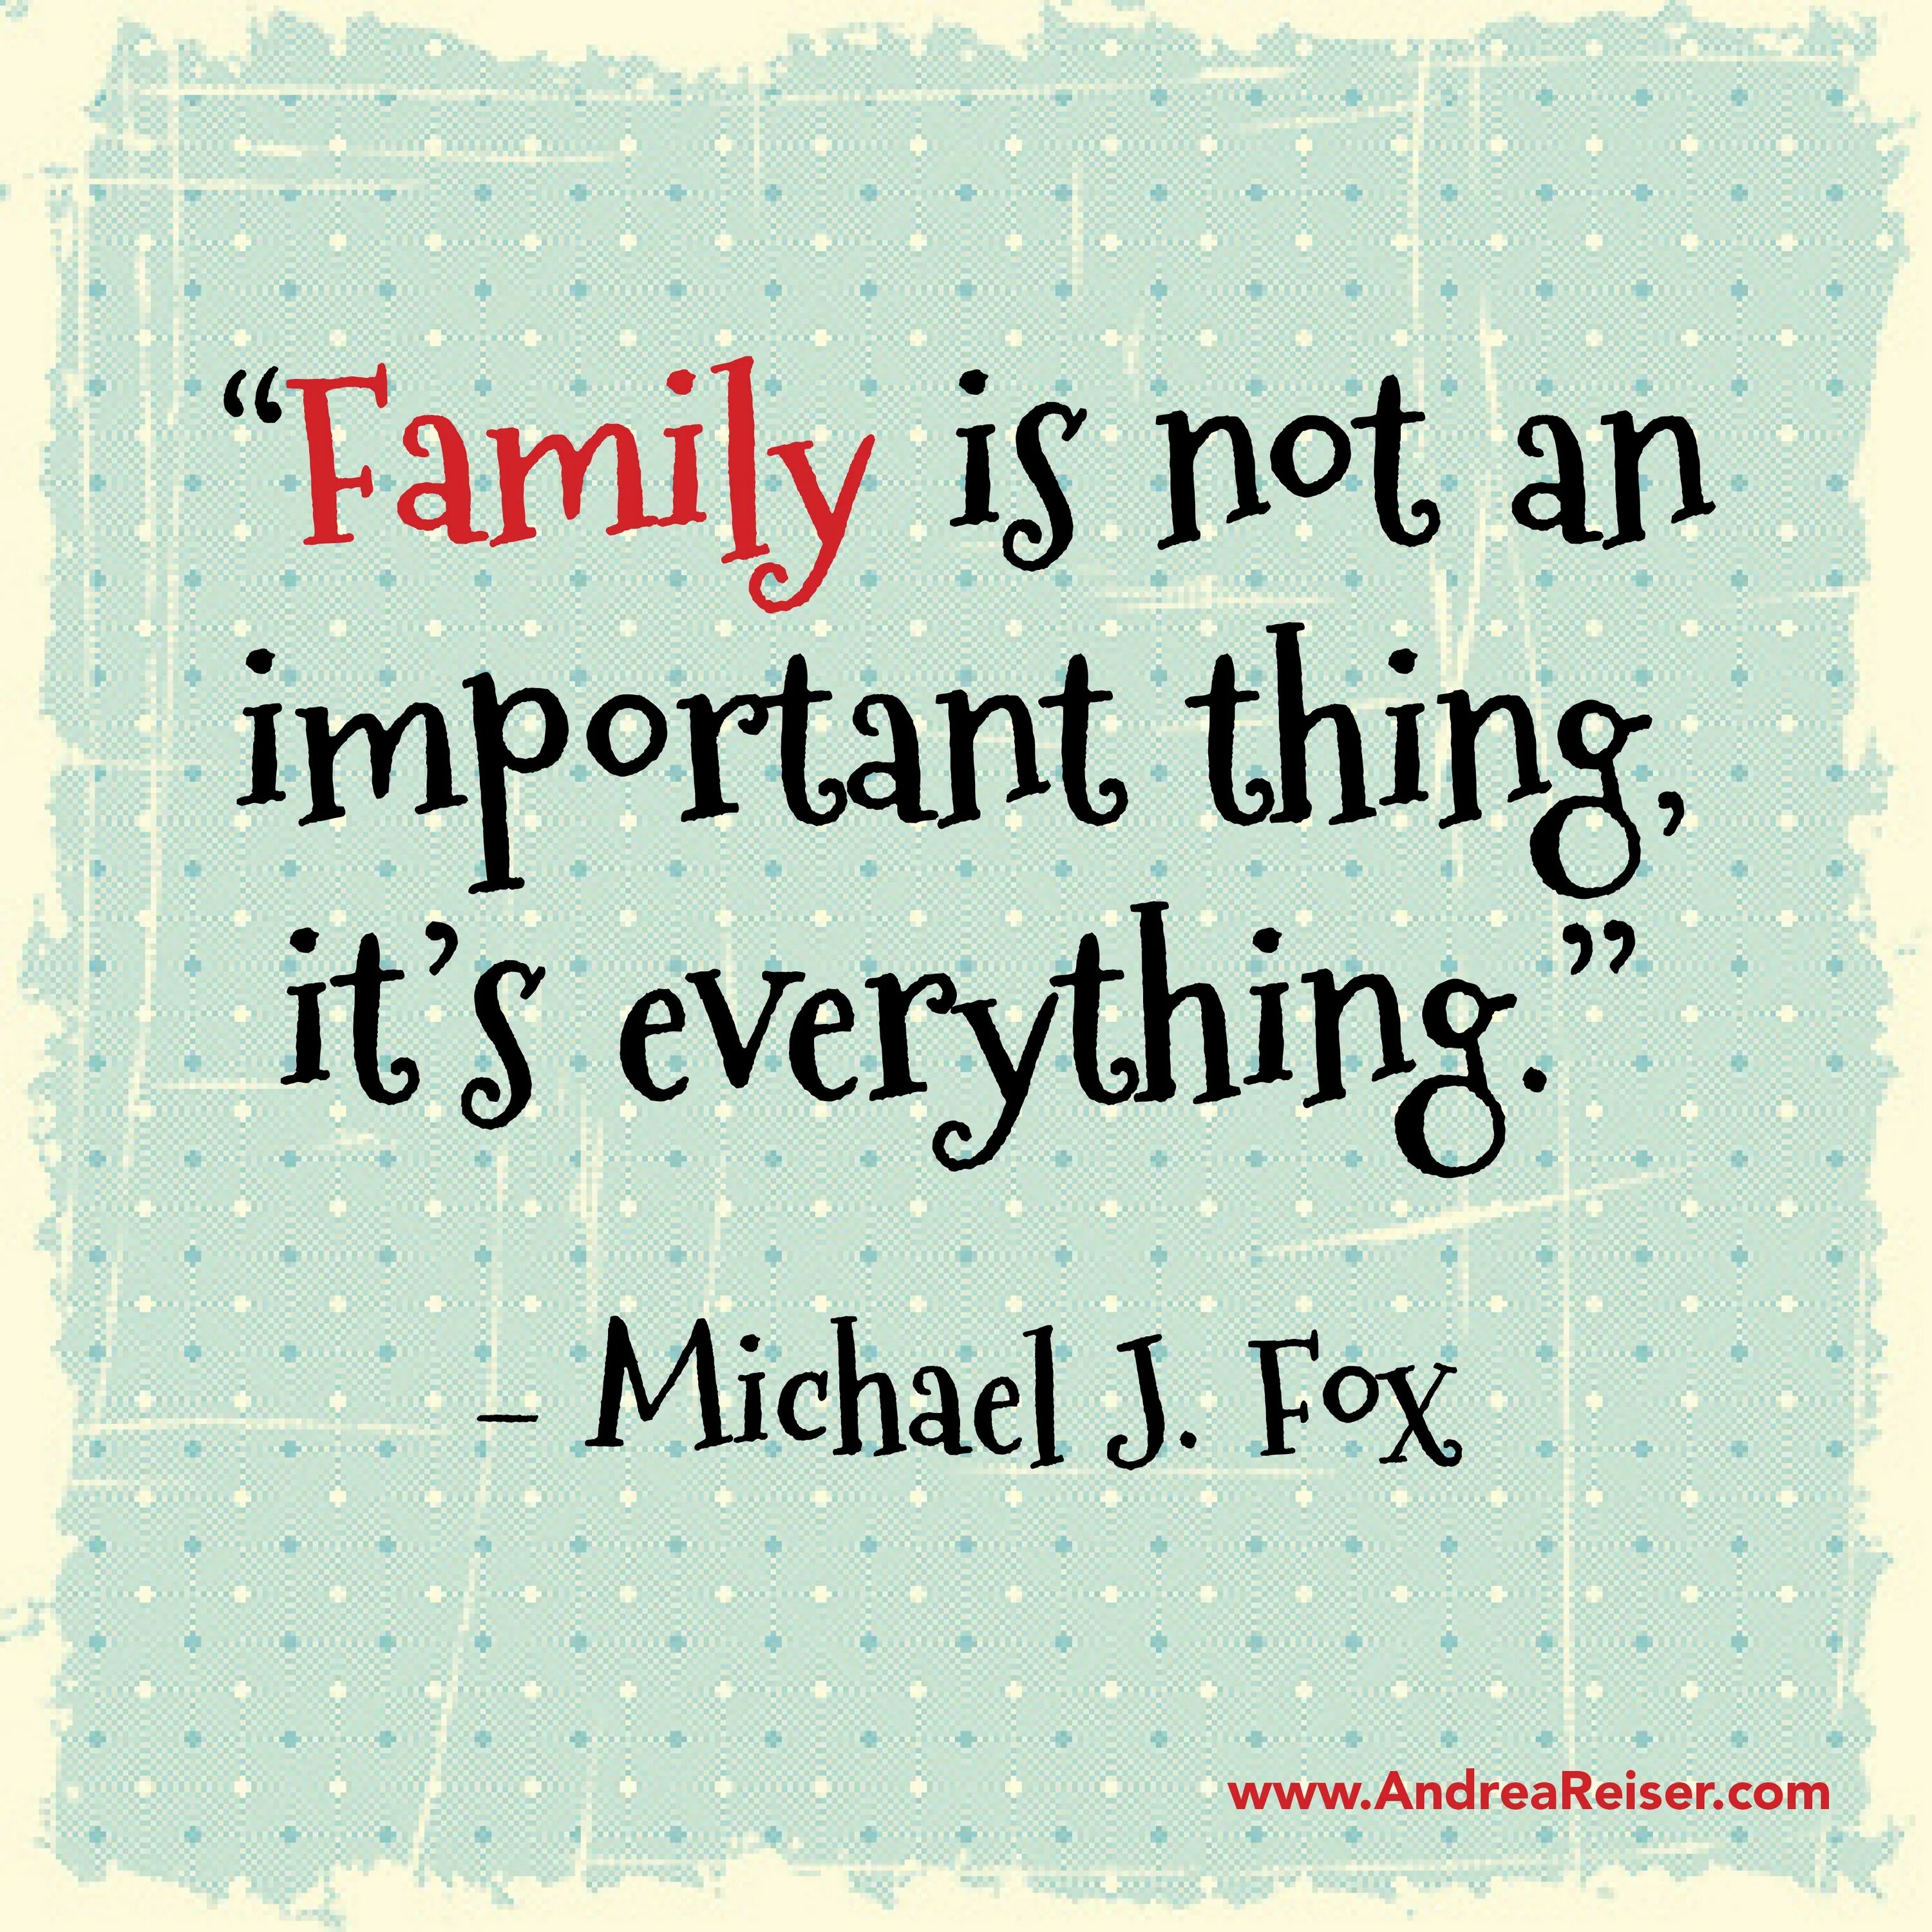 Family is everything. Family цитаты. About Family цитата. Sayings about Family. About Family Aphorism.